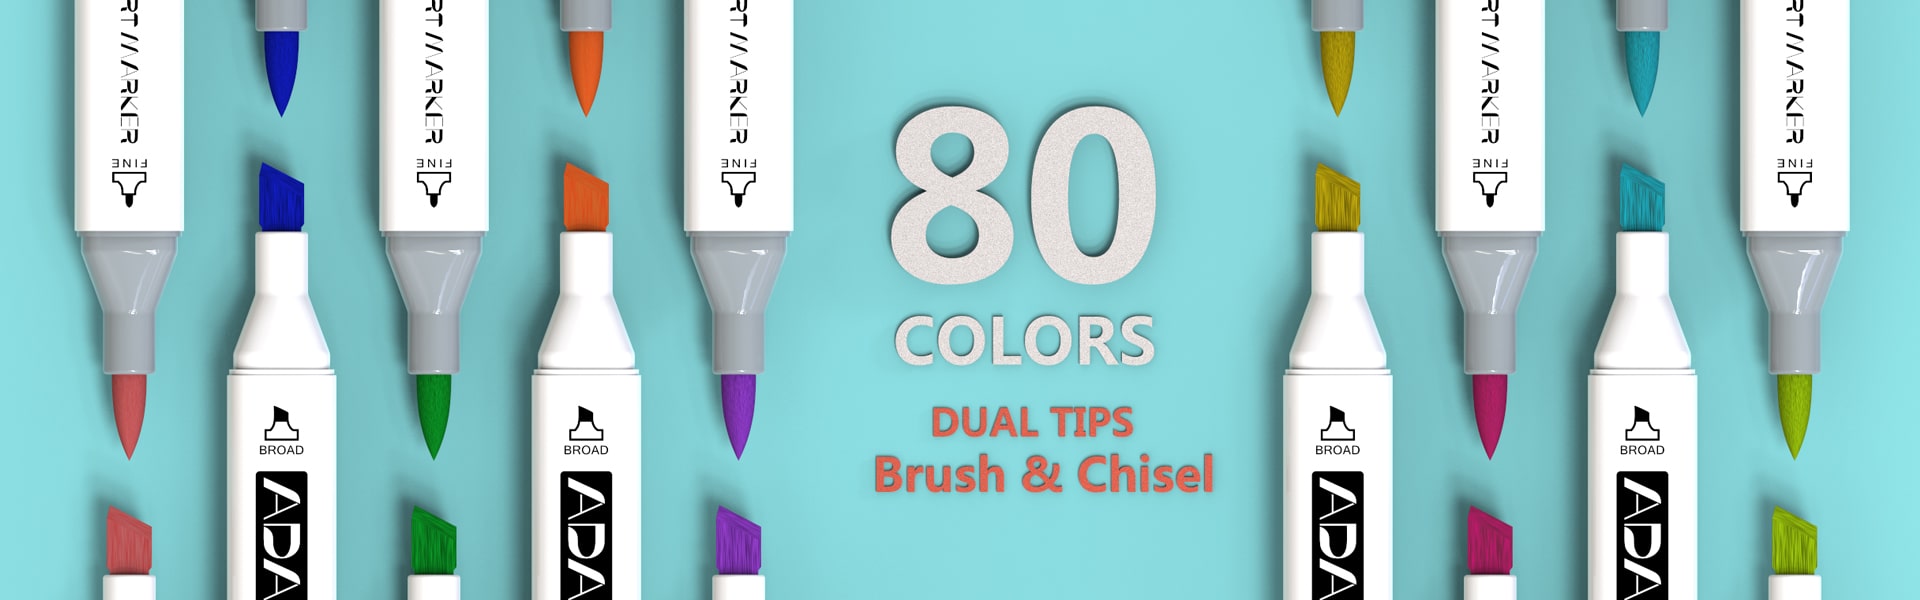 adaxi 80 colors brush markers